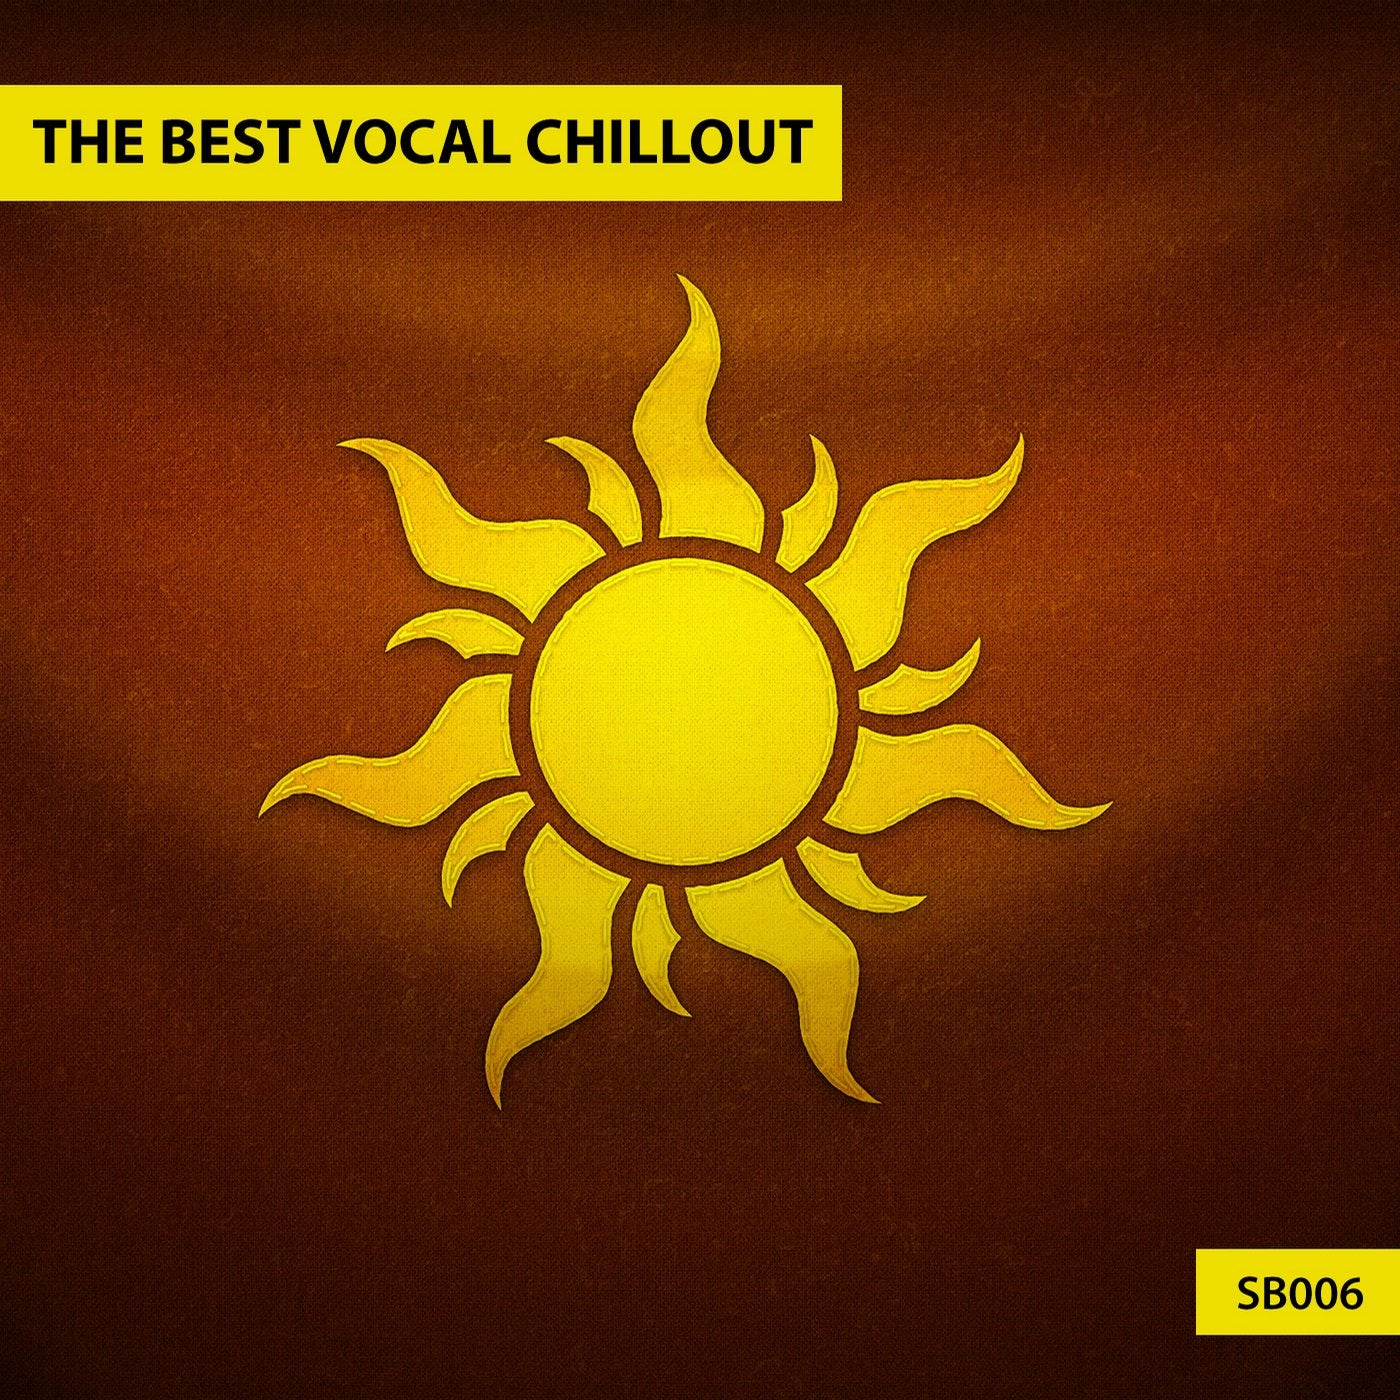 The Best Vocal Chillout